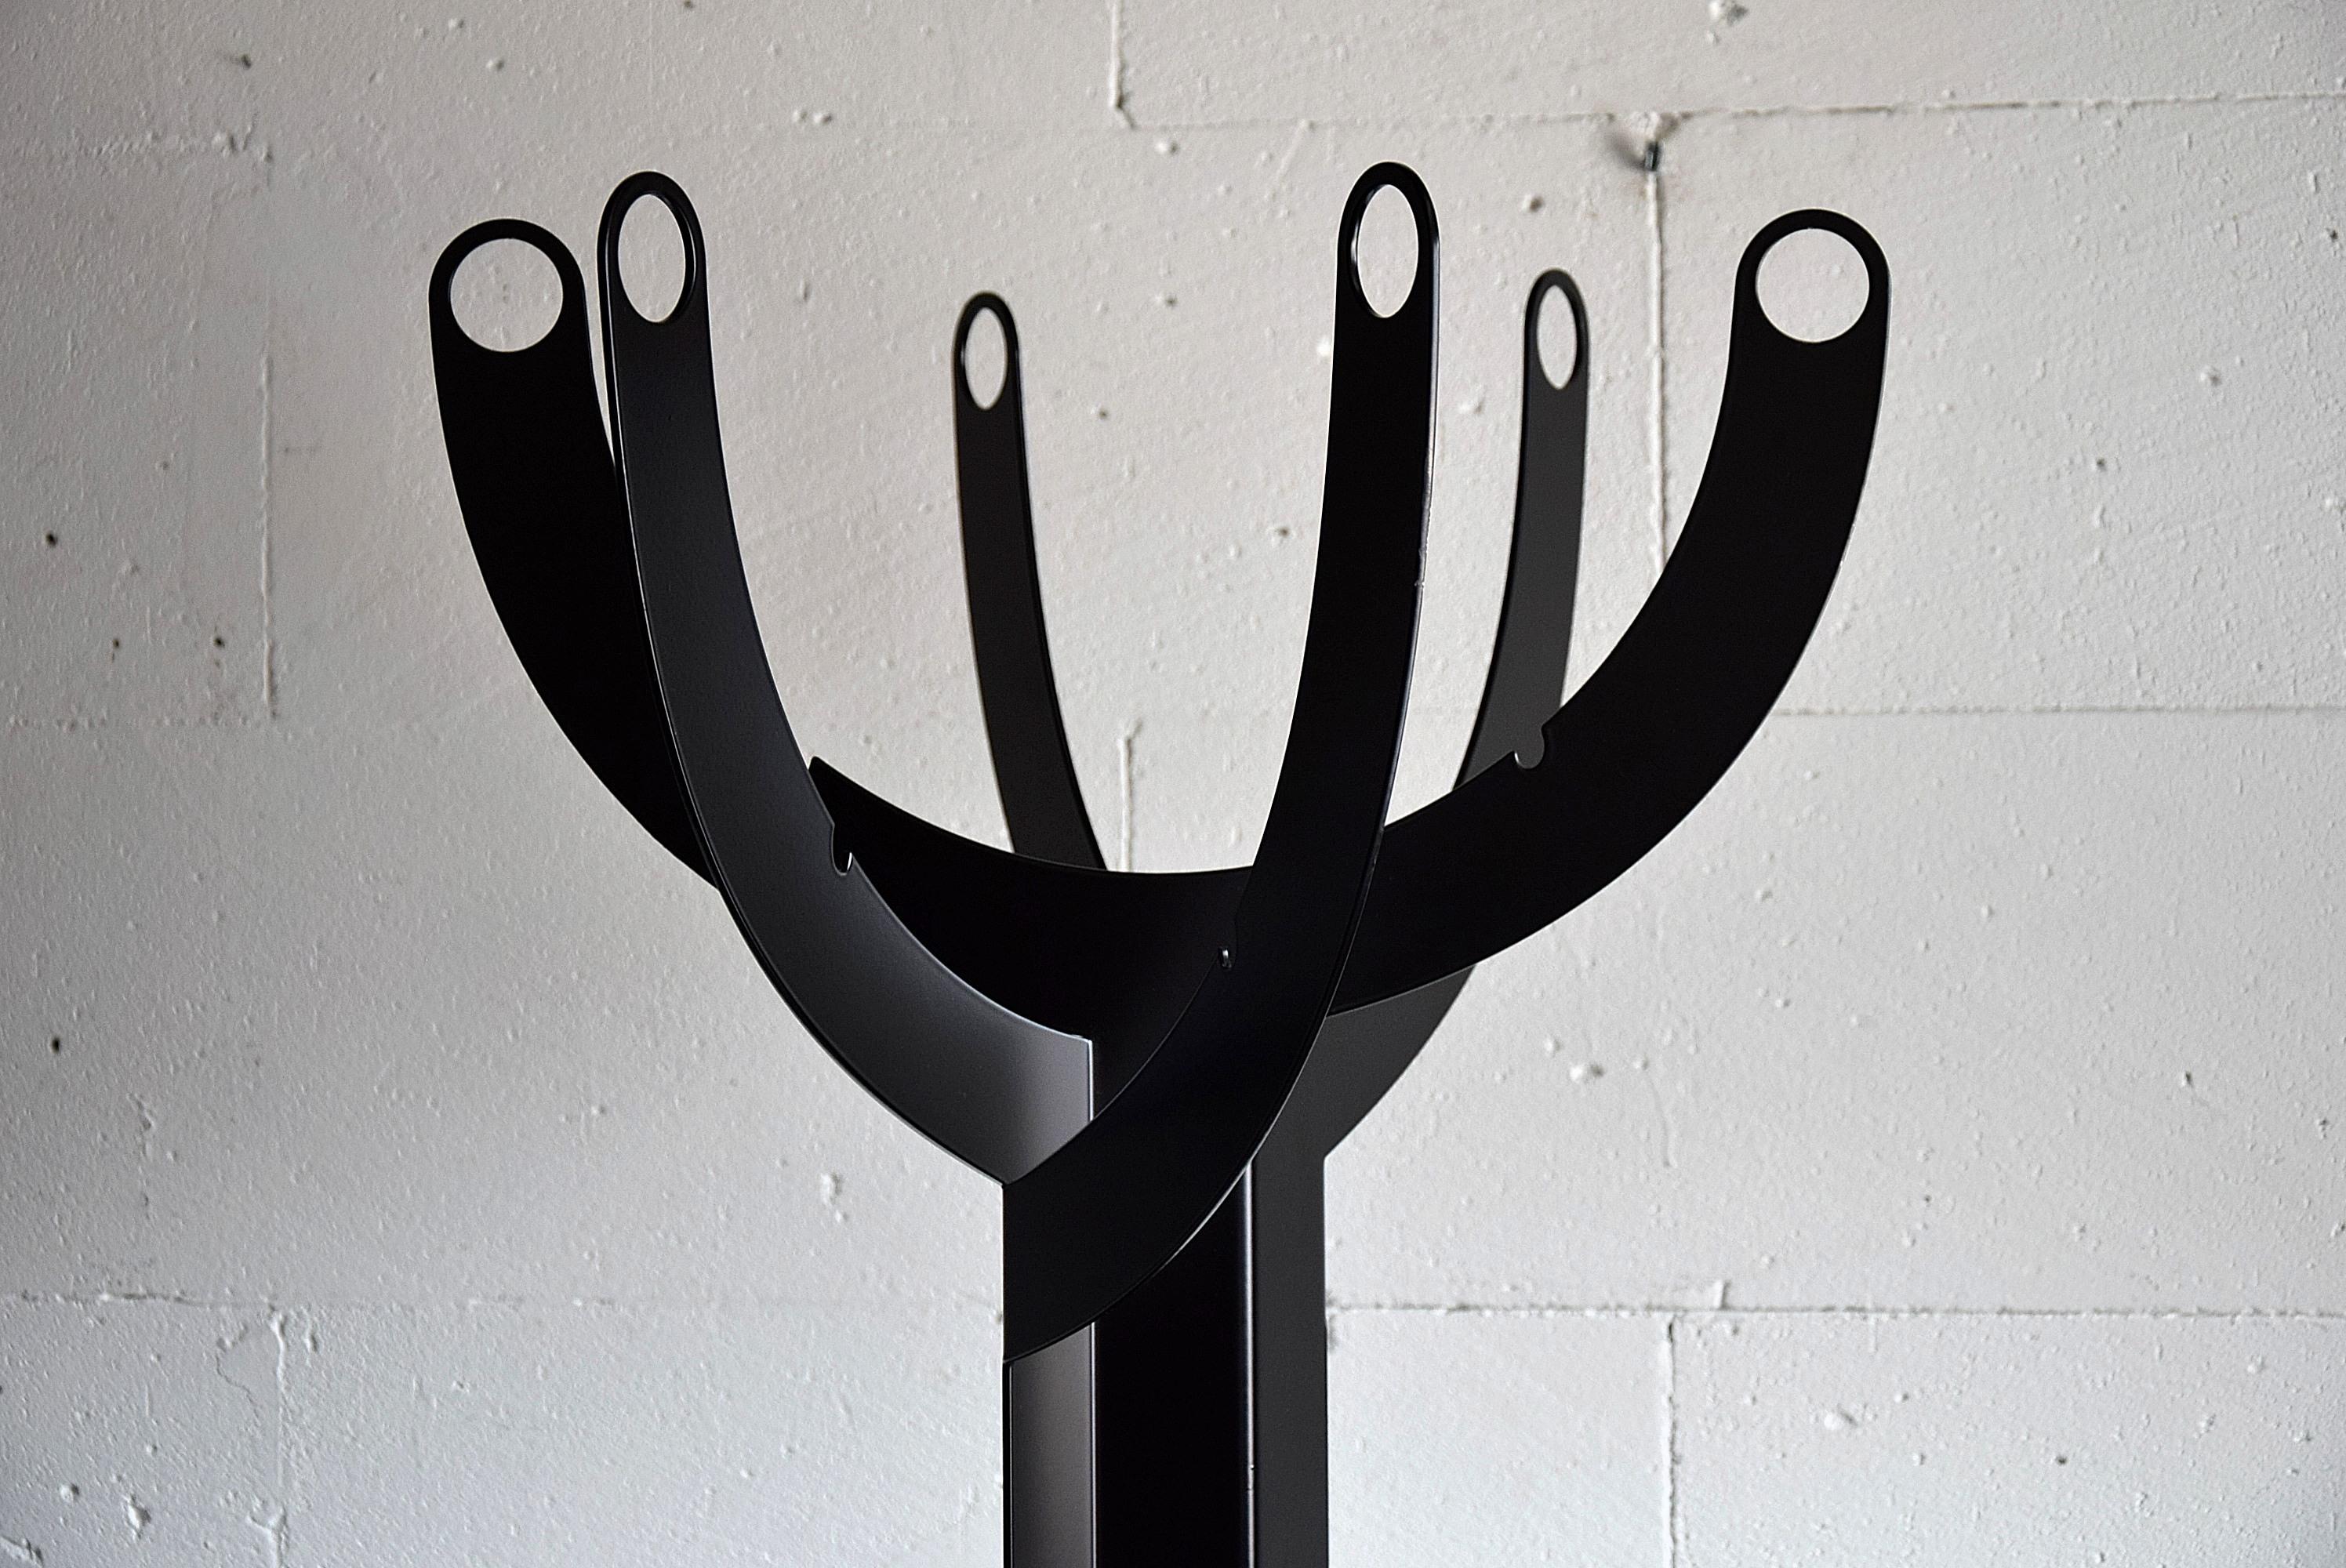 Modernist Italian black powder coated metal coat stand in perfect condition.
This sculptural piece will be shipped insured overseas in a custom made wooden crate. Cost of insured transport is crate included.